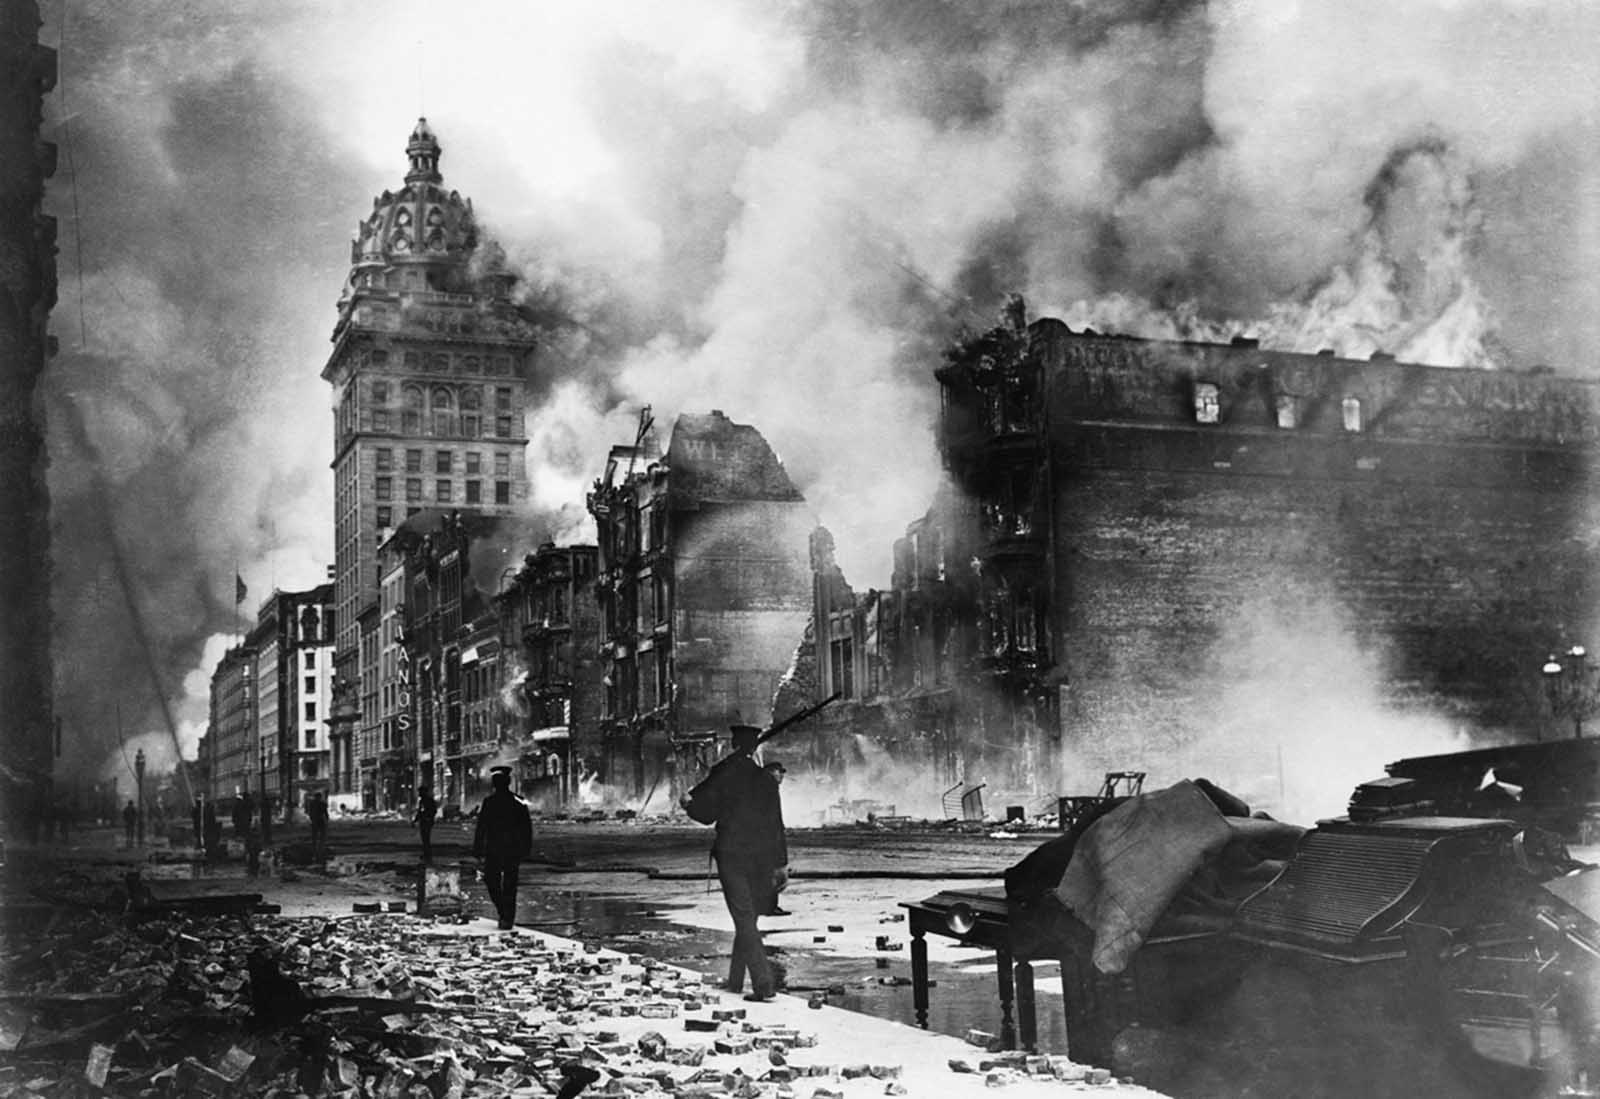 Troops walk east along Market Street after the devastating earthquake of 1906. The Call building burns in the distance